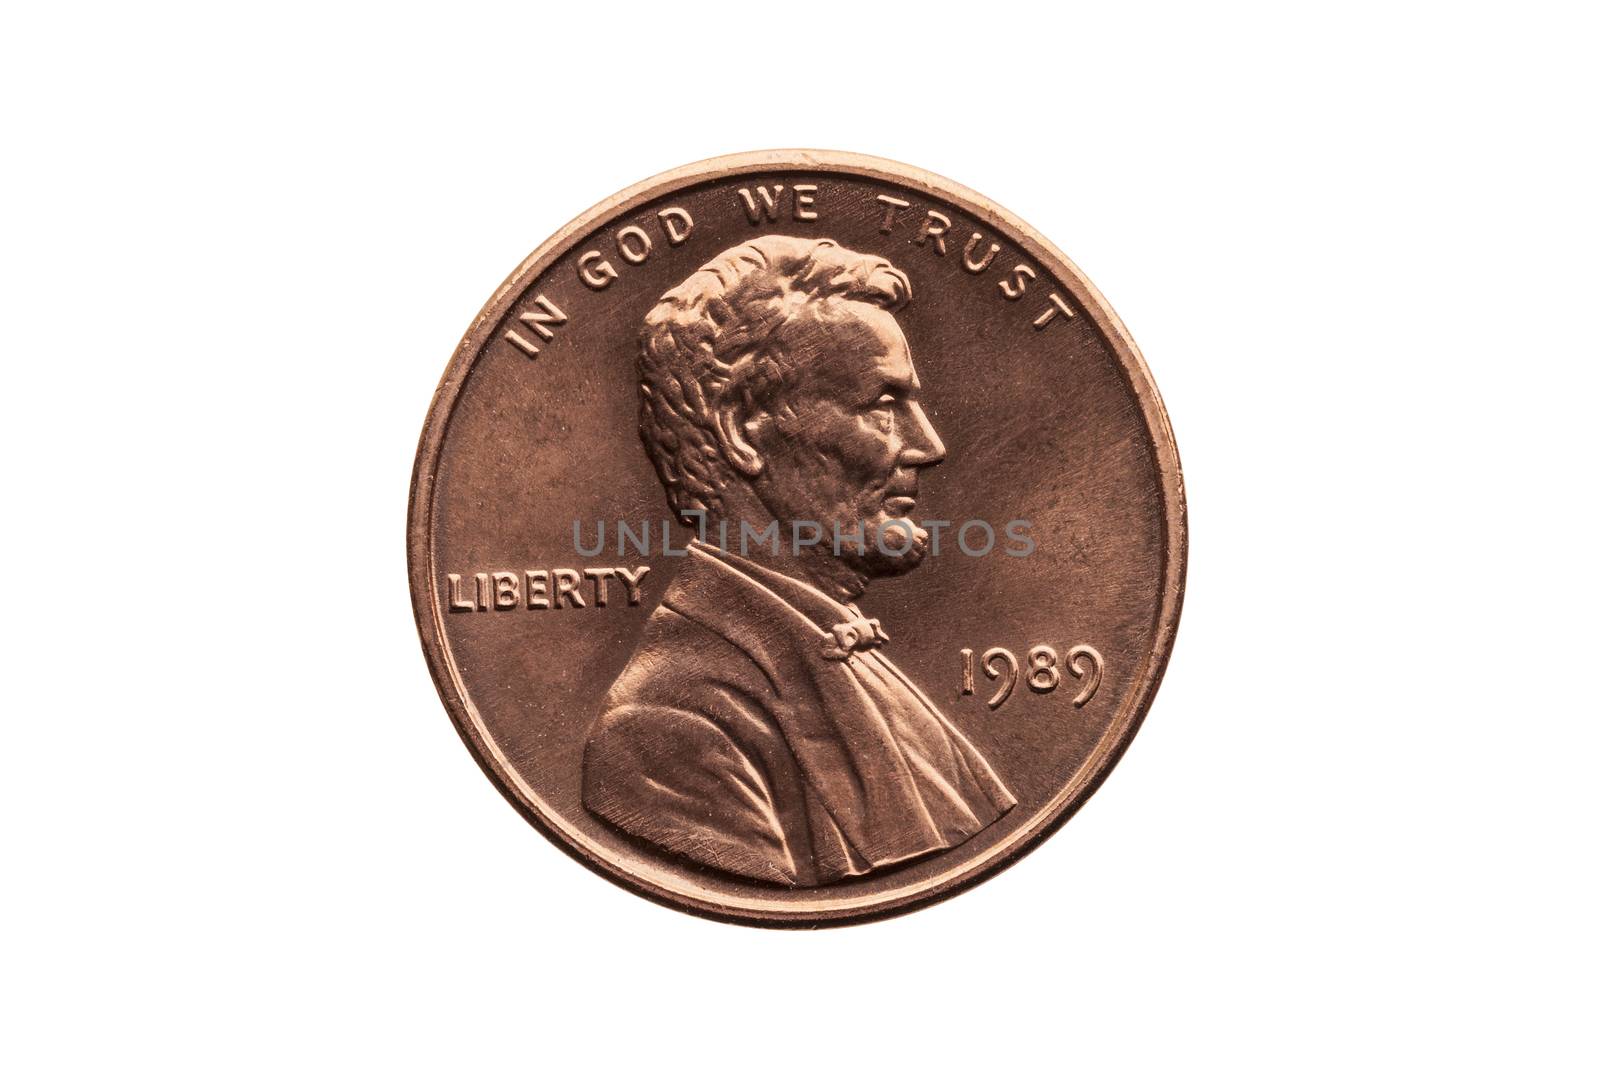 USA one cent penny coin with a portrait image of Abraham Lincoln by ant